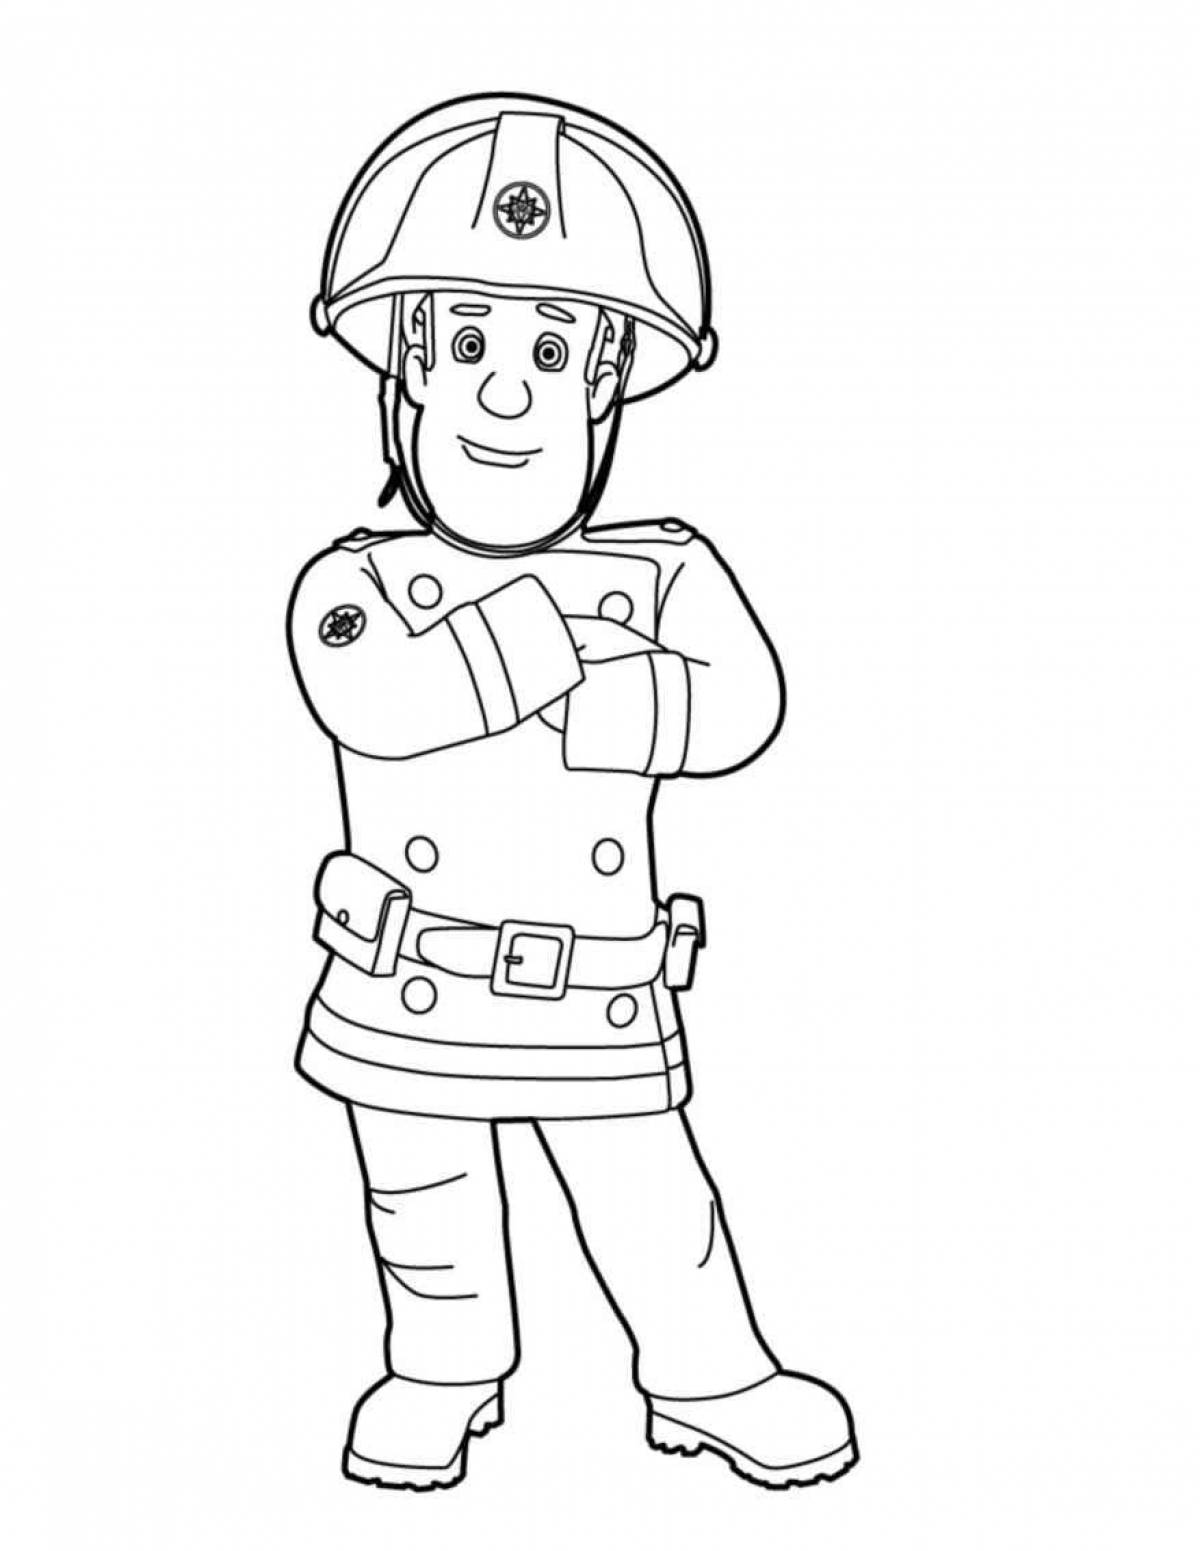 Playful fireman coloring page for kids